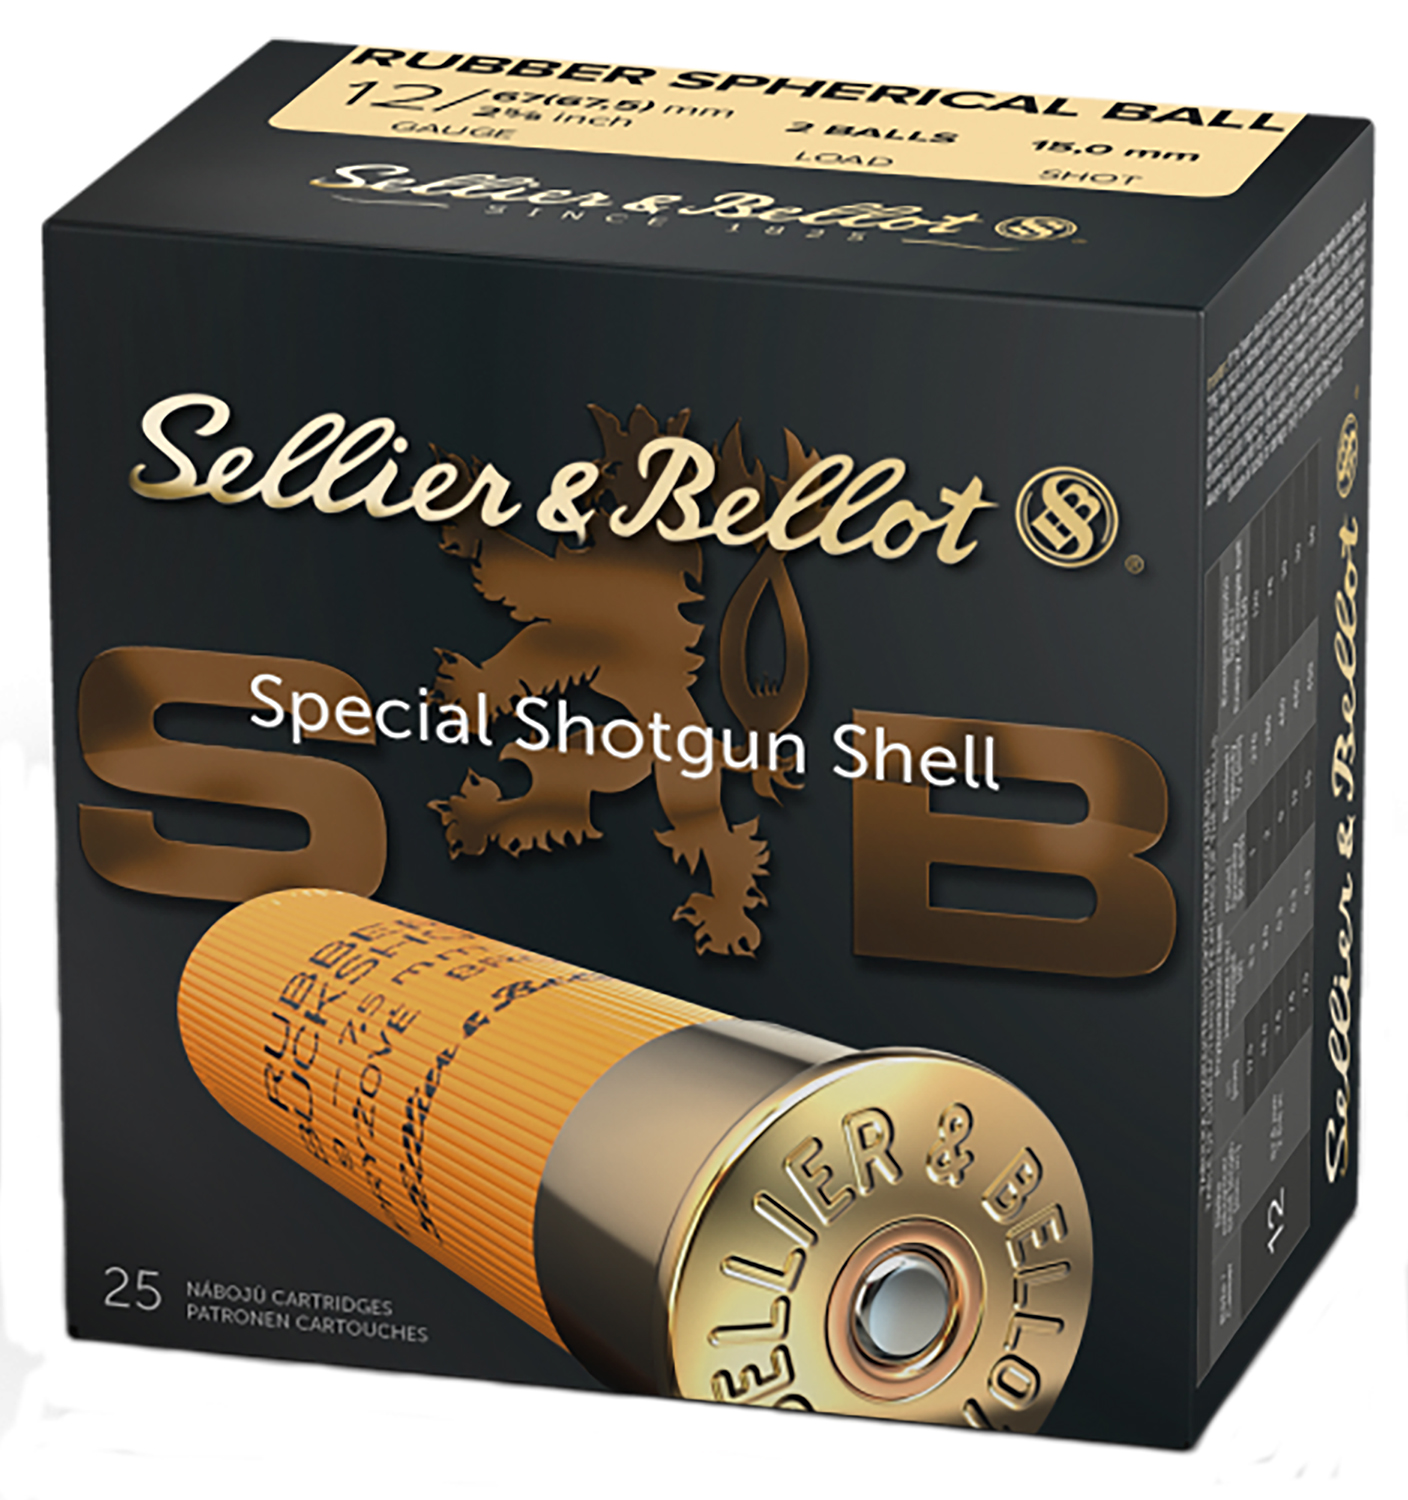 Shooting Magtech brass 12ga slugs for function and 3 powders 